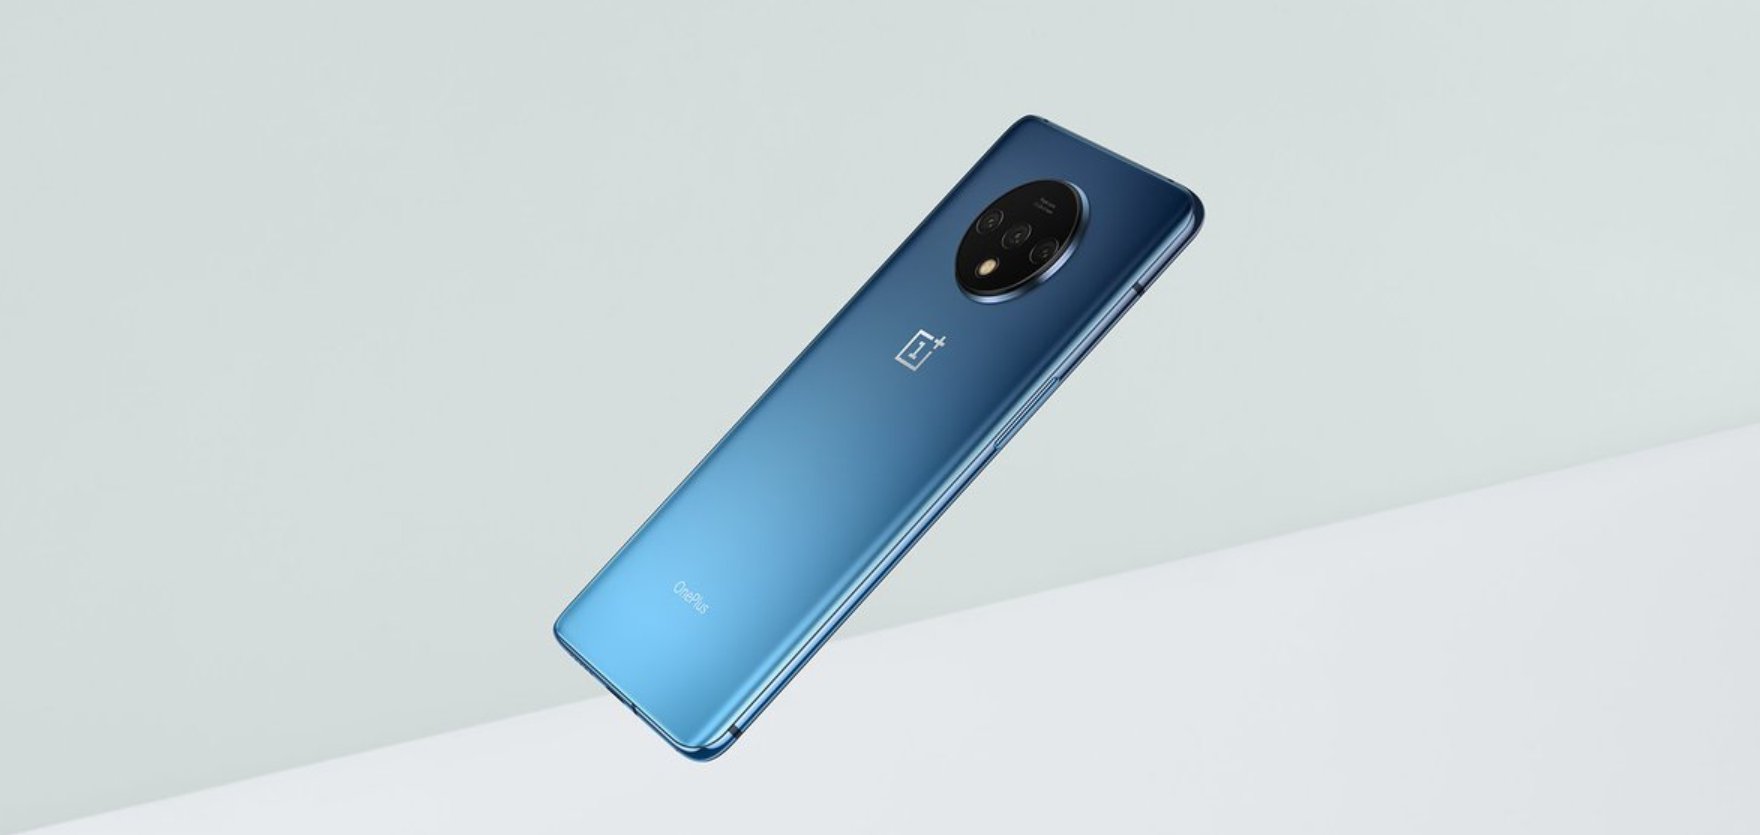 This Is What The OnePlus 7T Will Look Like. Are You Excited?